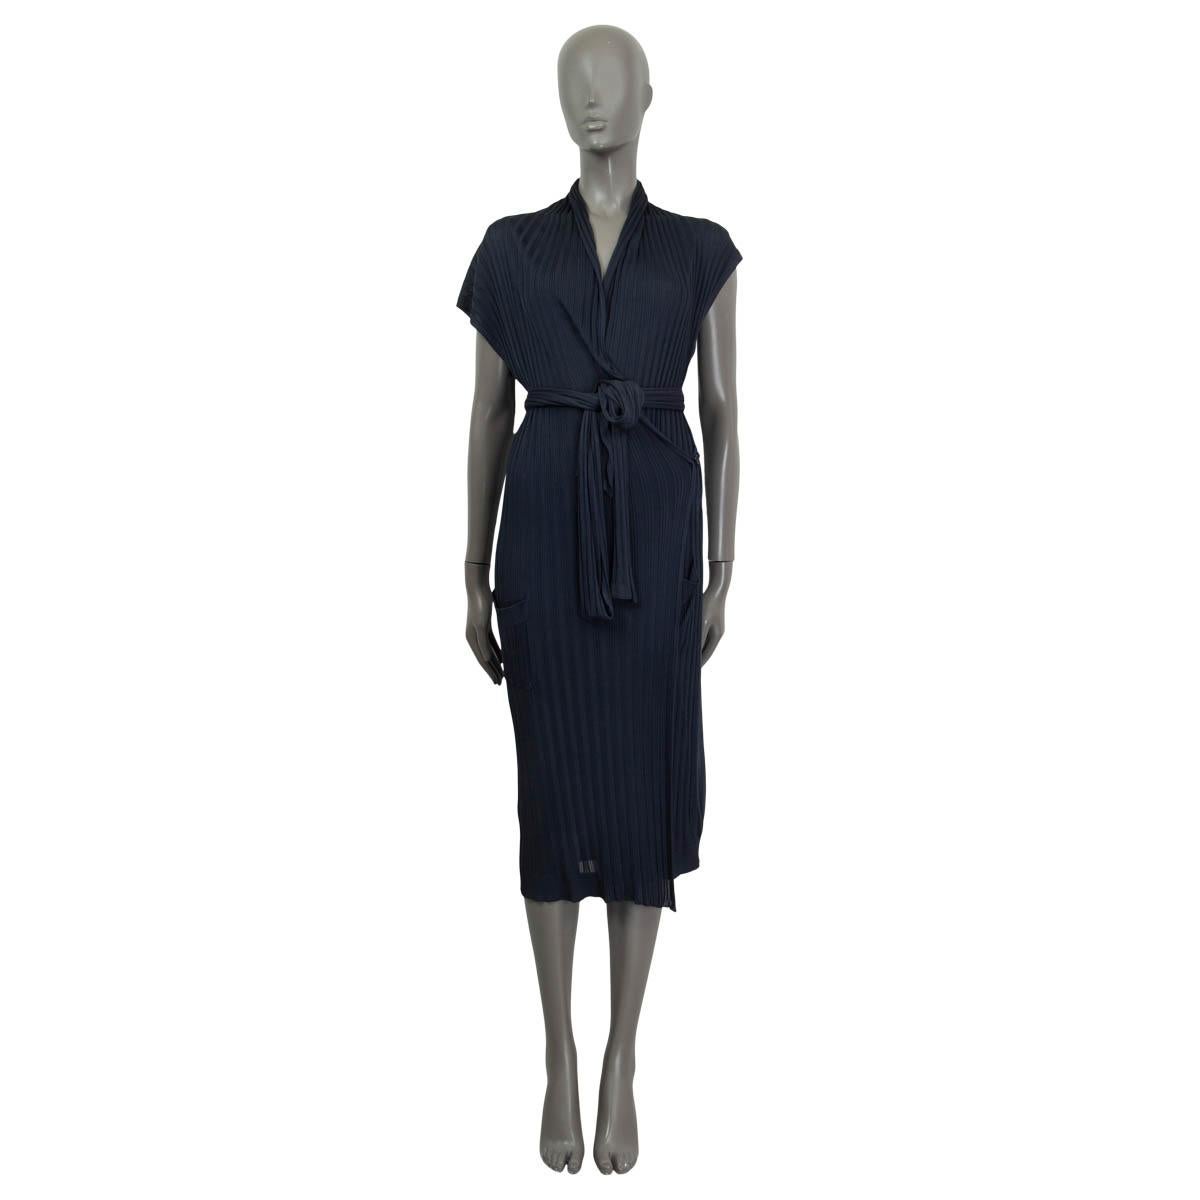 100% authentic Hermés belted sleeveless wrap dress in midnight blue viscose (100%). Features two patch pockets on the front and a deep v-neck. Opens with a button and a push button on the front. Unlined. Comes with a slip dress in midnight blue